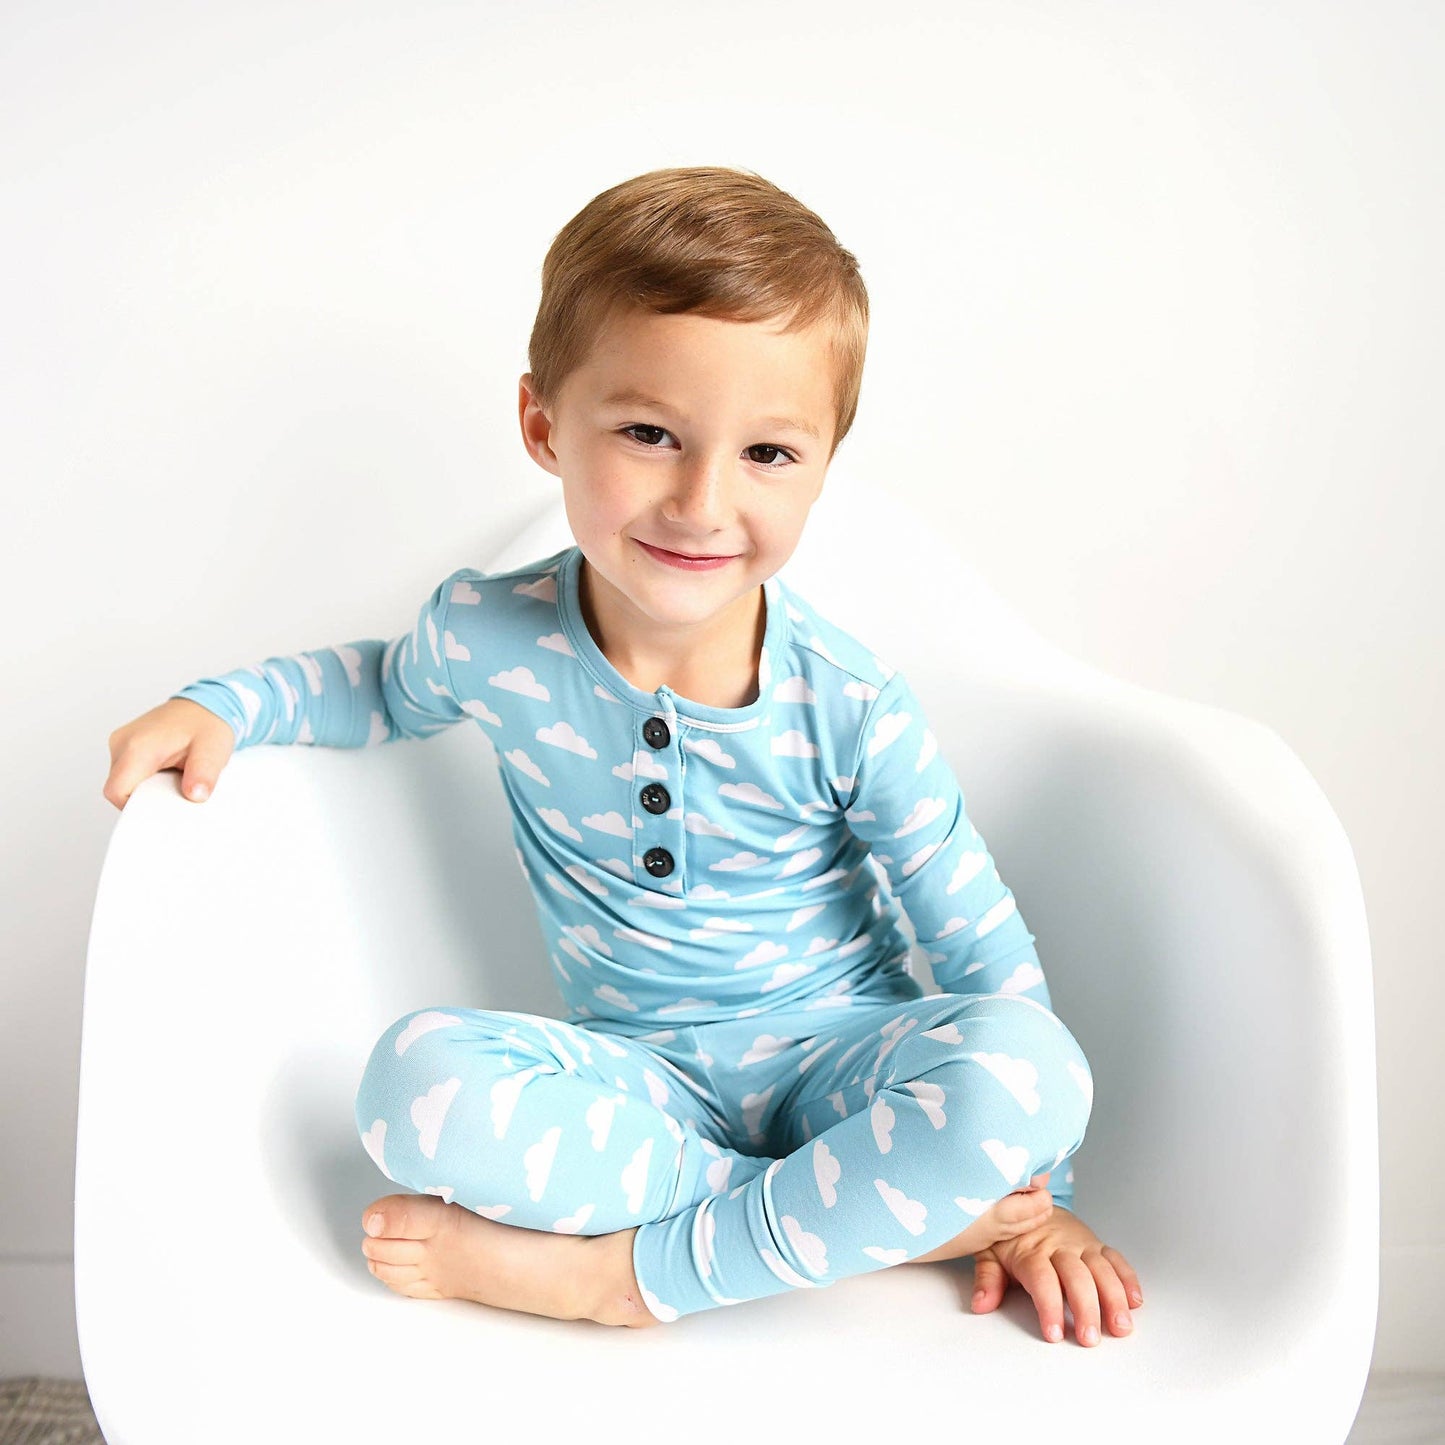 Gigi and Max - Andy Clouds TWO PIECE: 2t/3t